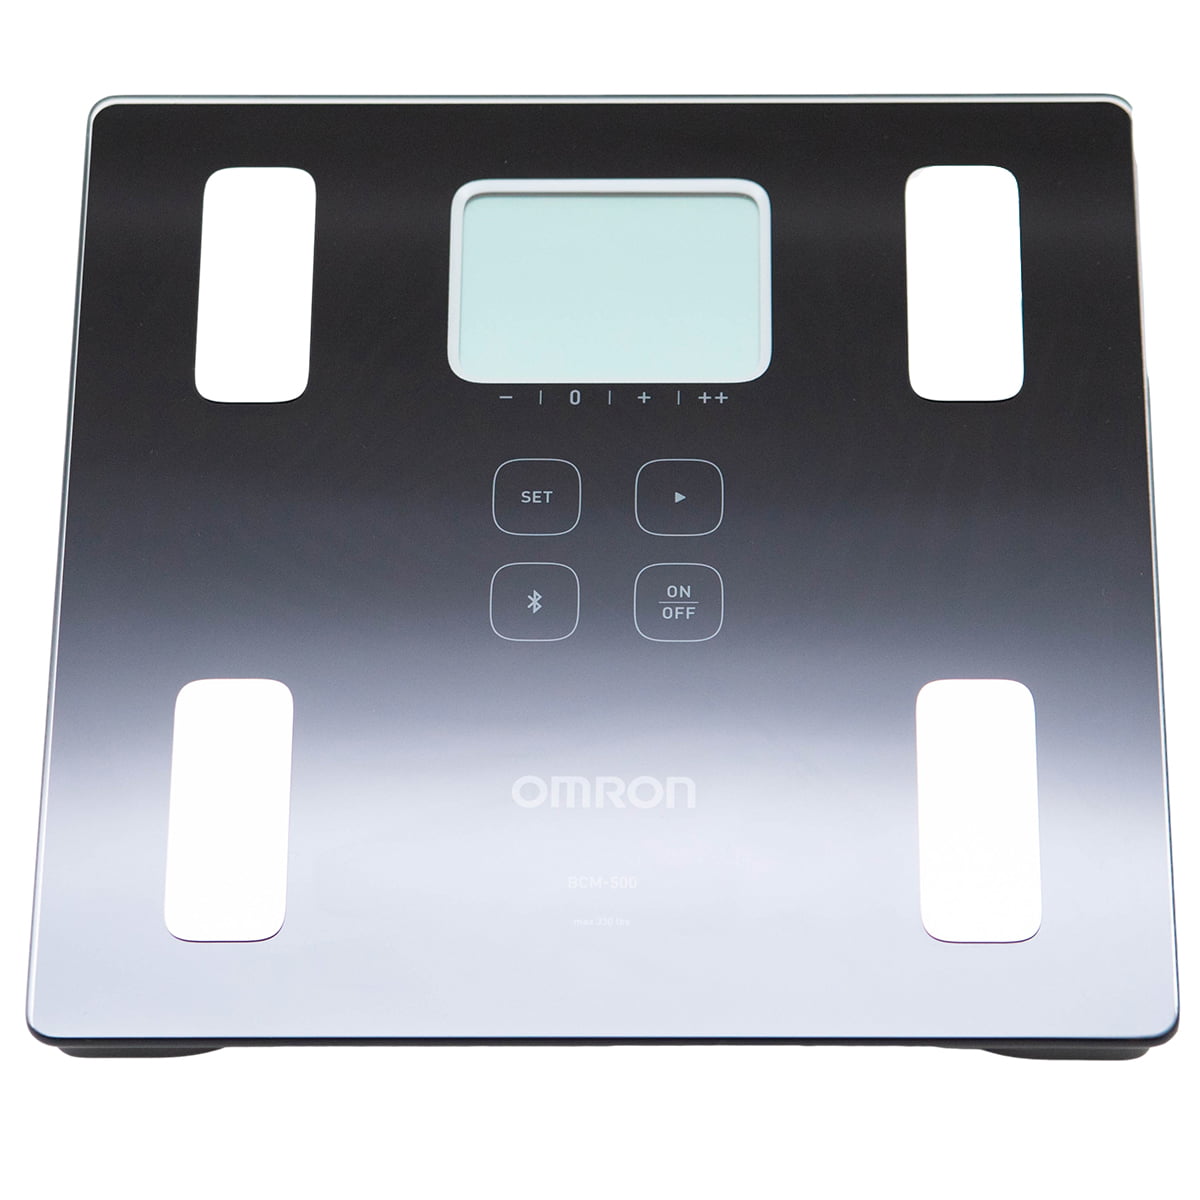 CAS Body Fat Analyzer Scale HBF 830 Quick & Easy Checking Just Step On 8 profil 